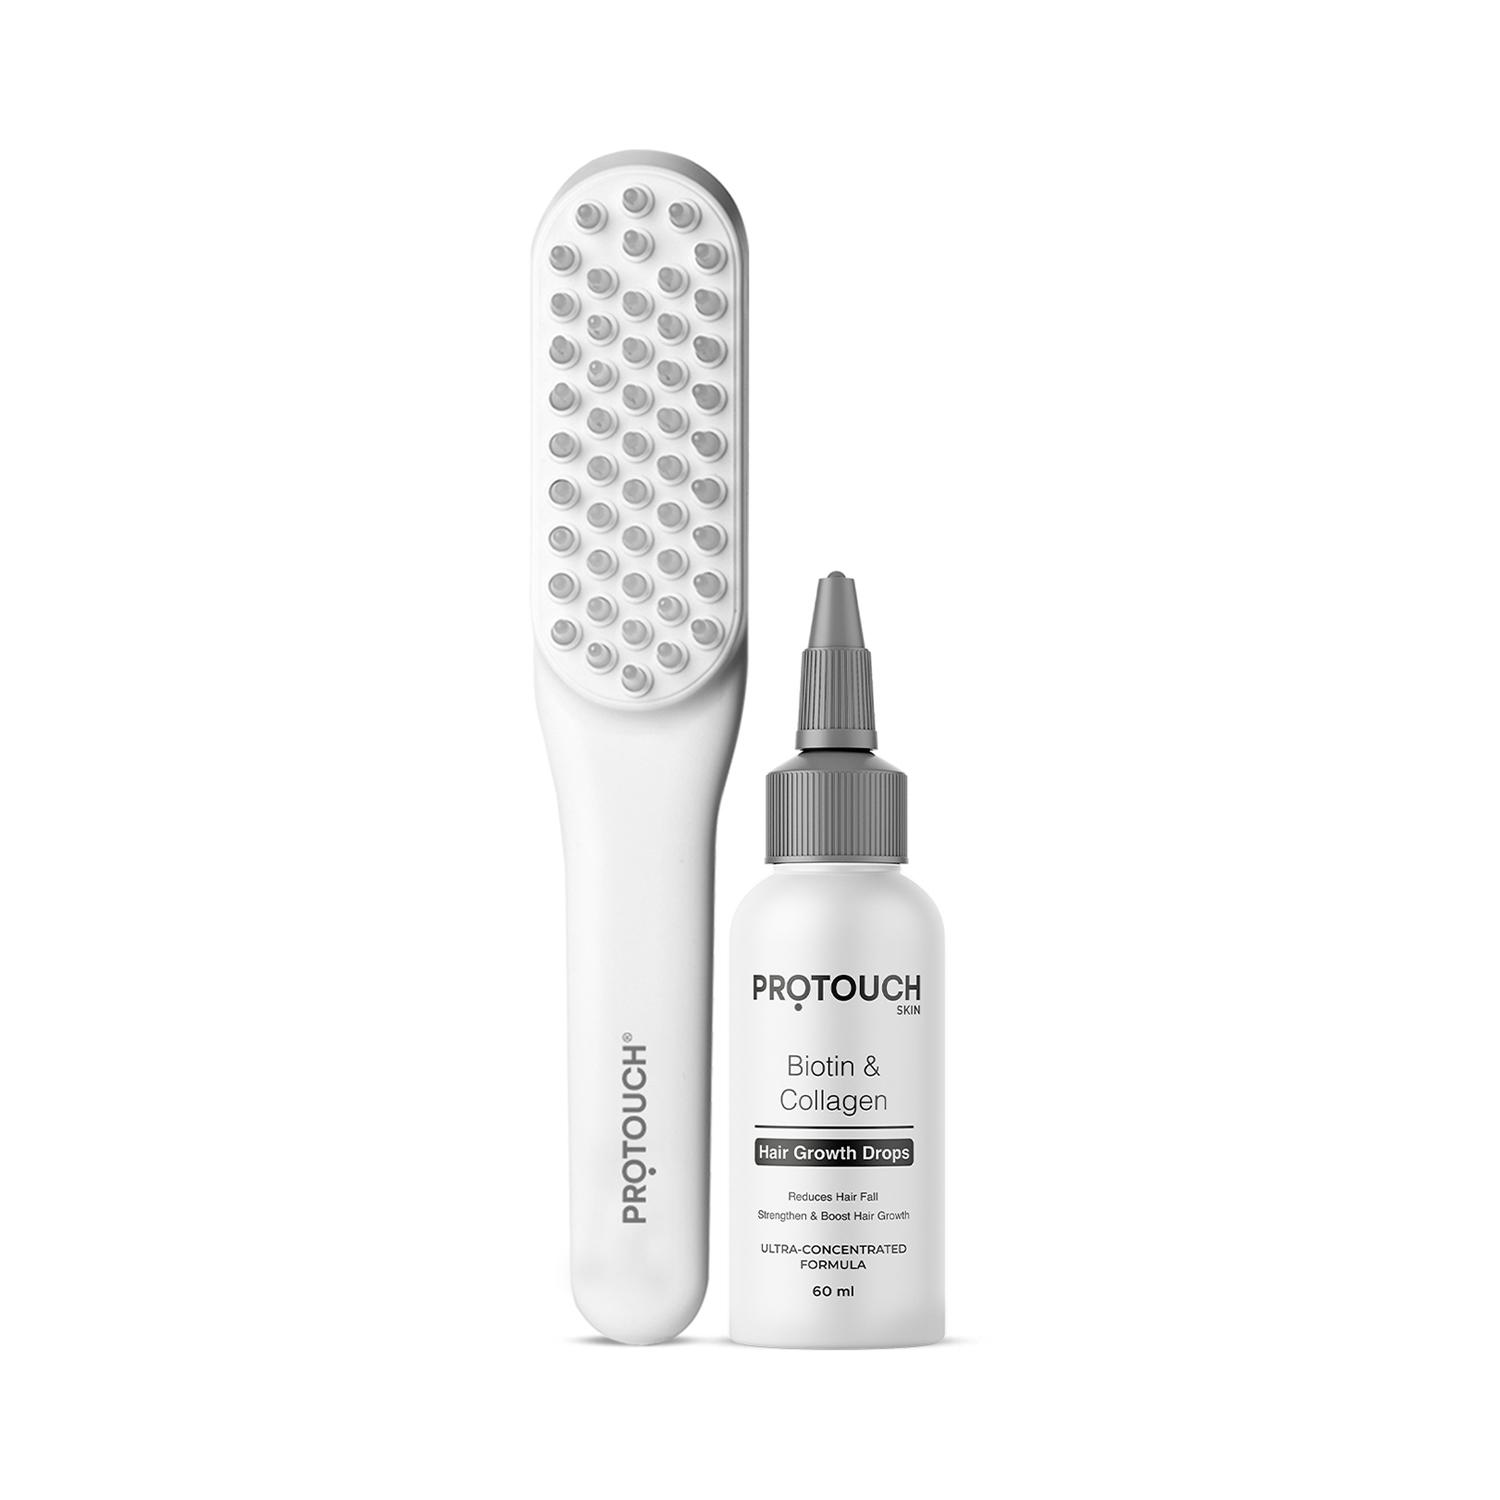 Protouch | Protouch Complete Hair Growth Combo - LED Therapy Comb, Head Massager, Biotin Collagen Hair Serum